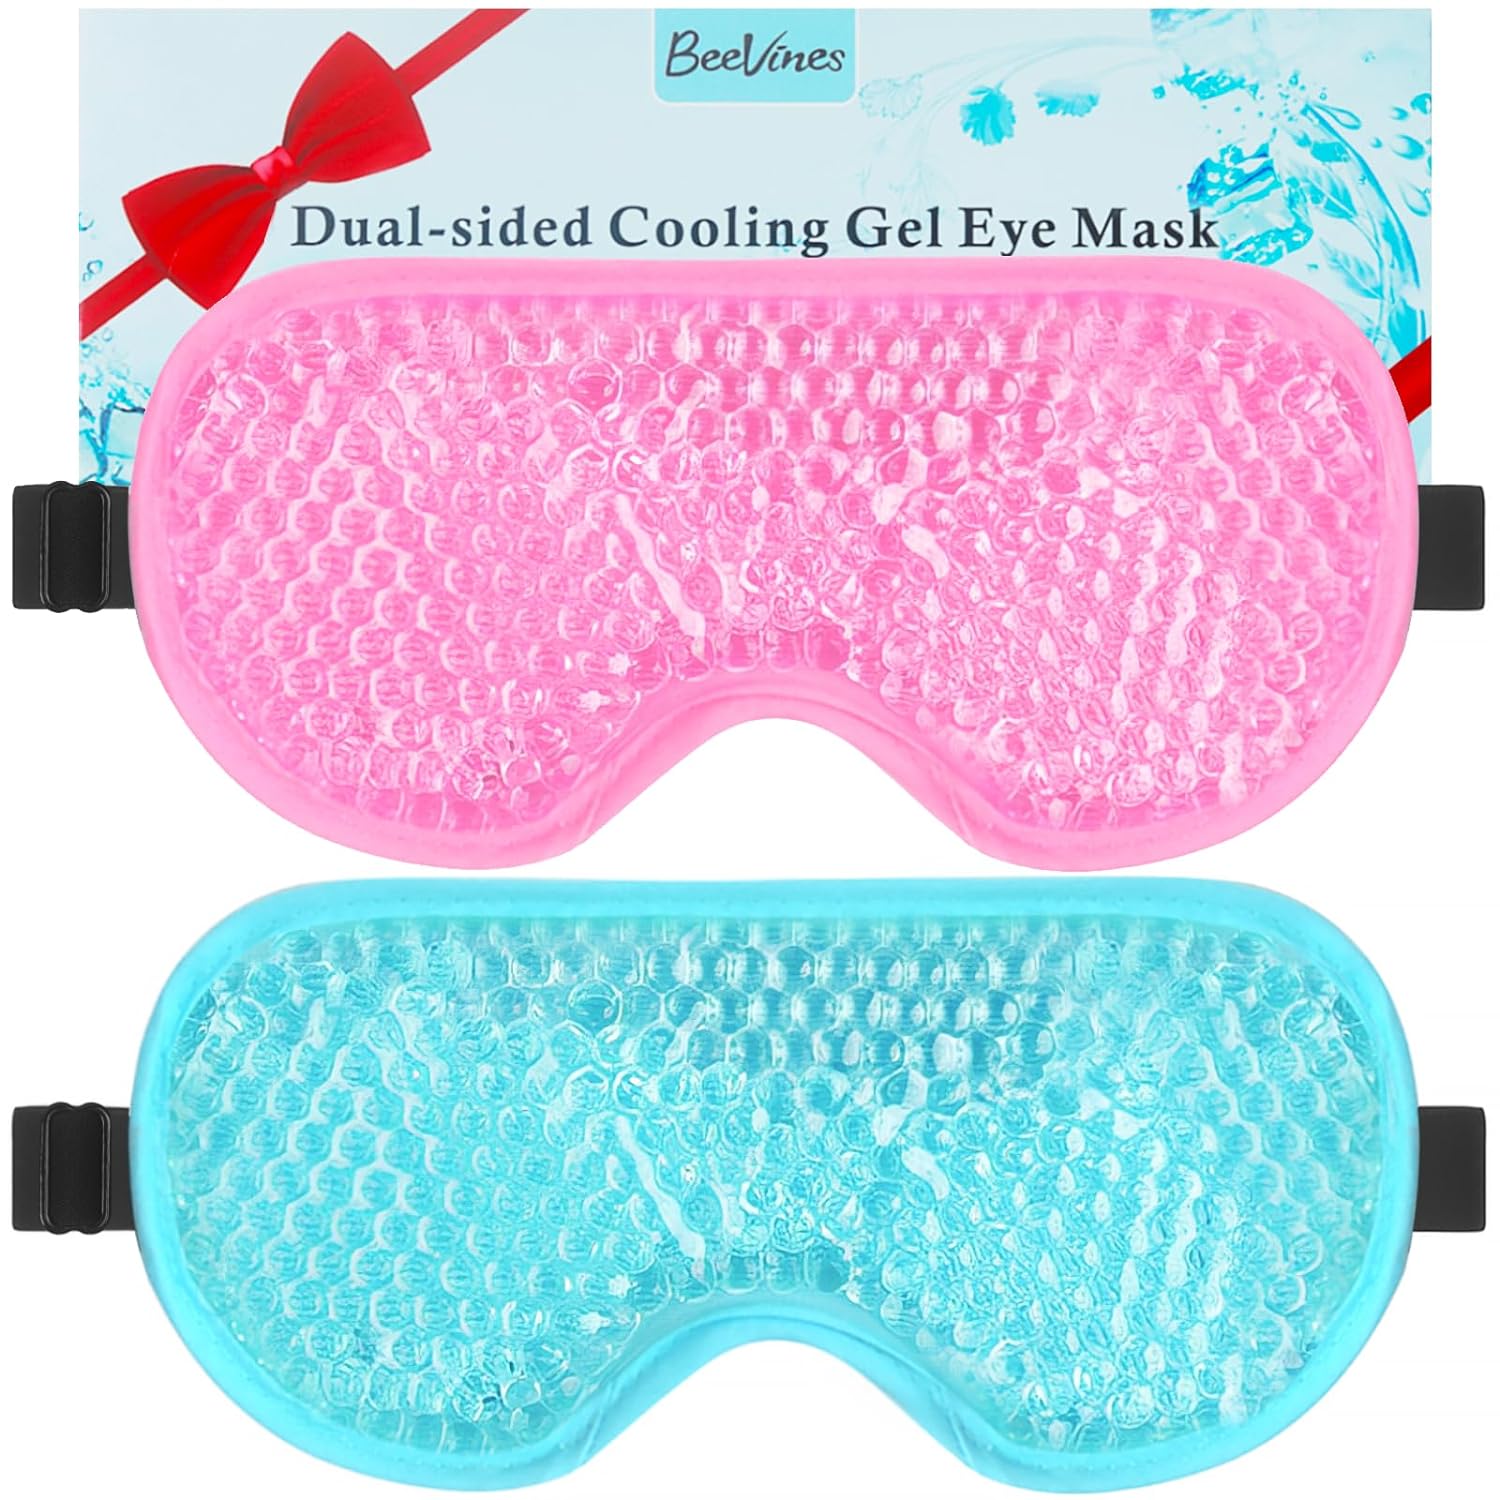 Great quality super soft material on the inside. Stay cold very long it came with the cutest thank you and very nice packaging they even added sachet essential oil so the masks had a great smell